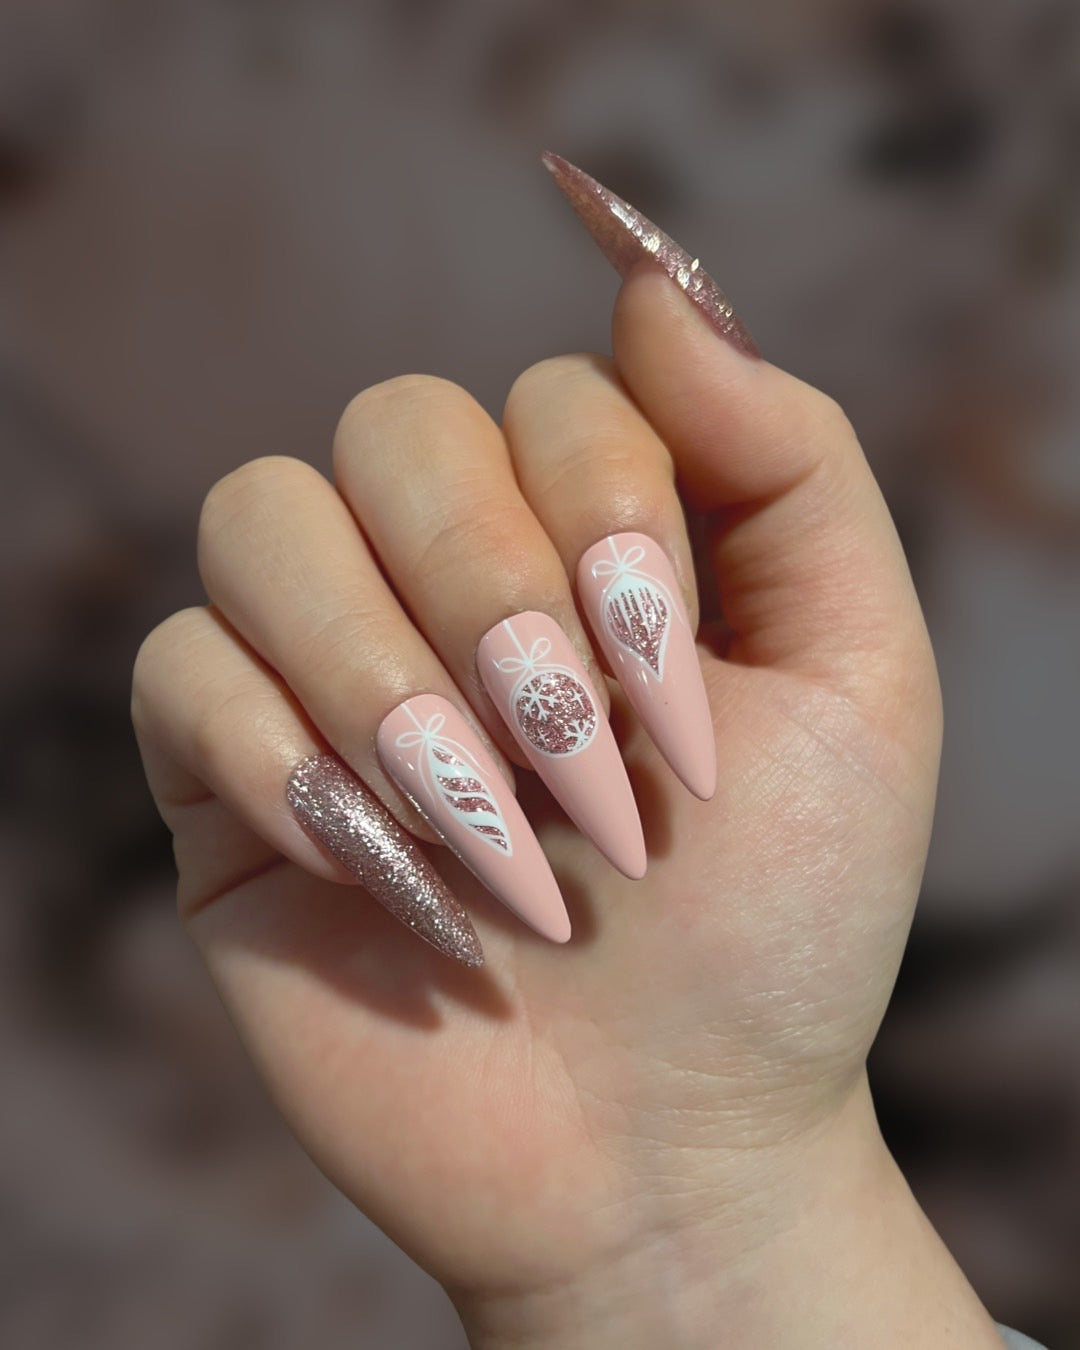 40 Festive Christmas and Holiday Nails 2021 : Candy Cane and Ombre Festive  Nail Design | Festival nails, Christmas nails, Winter nails